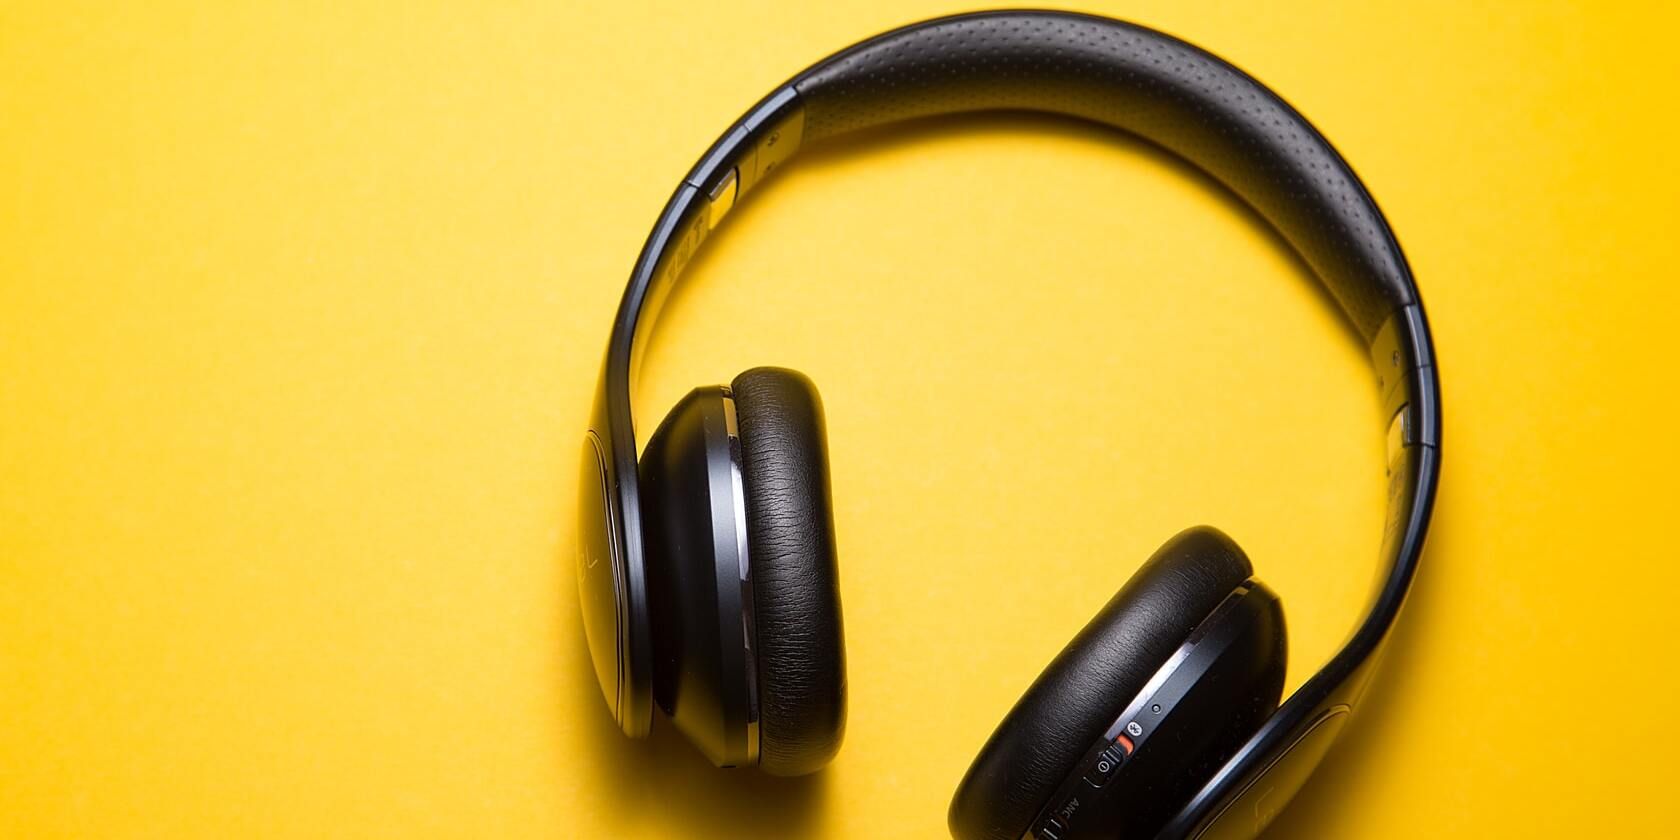 Wireless headphones on a yellow surface